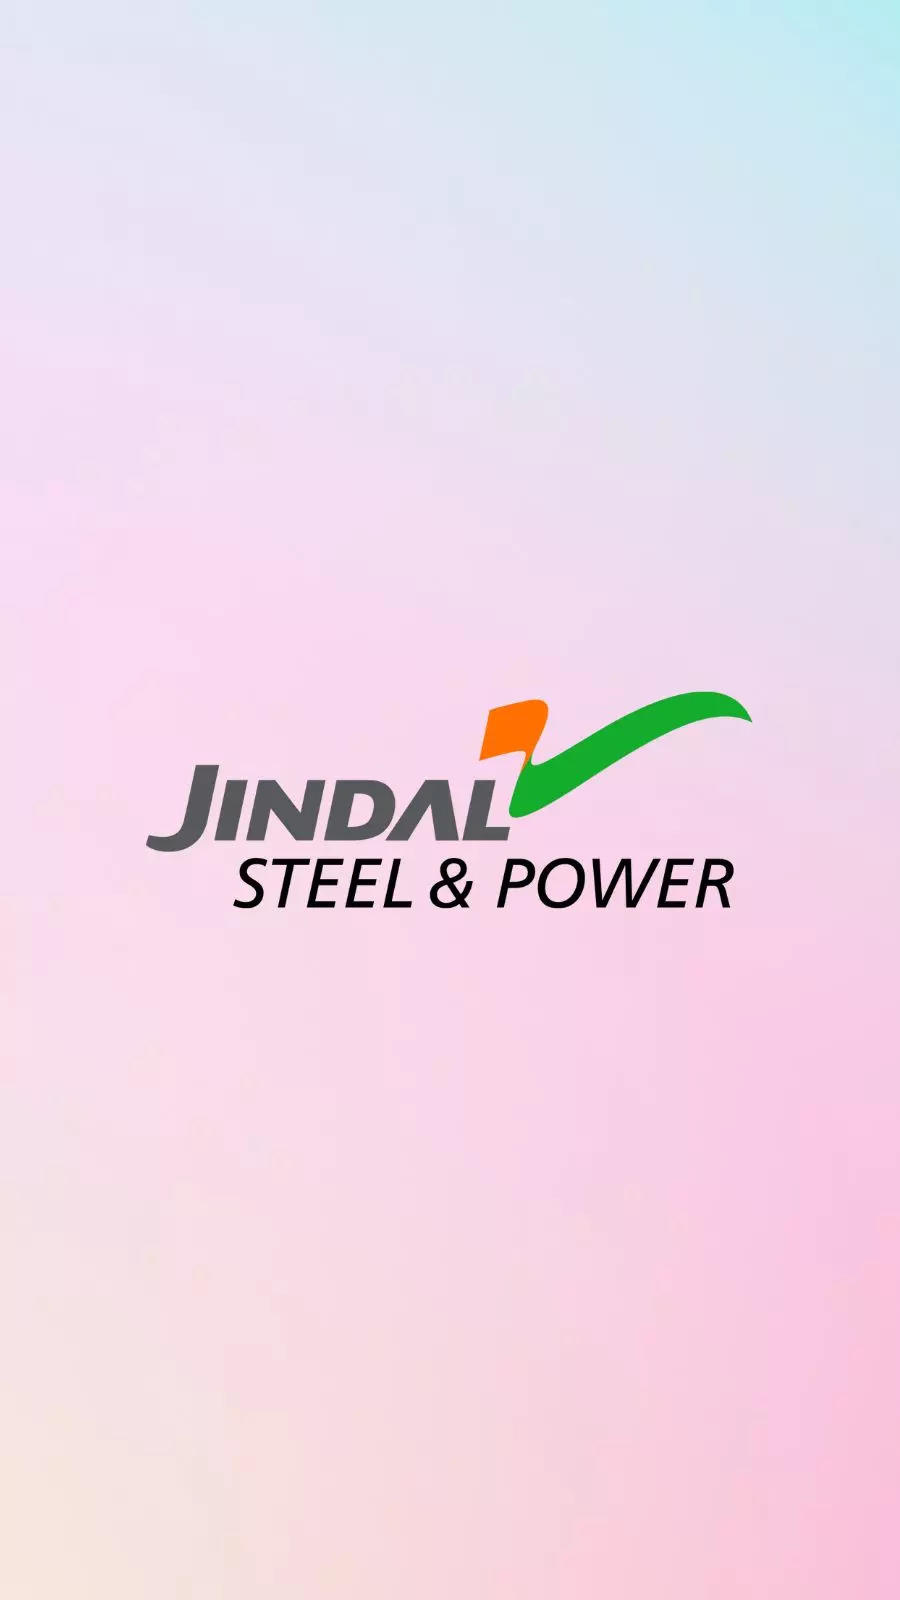 Relief to Jindal Steel and Power: Post-GST VAT Refunds must be Processed  u/S 142 (3) of CGST Act, 2017, rules Orissa HC